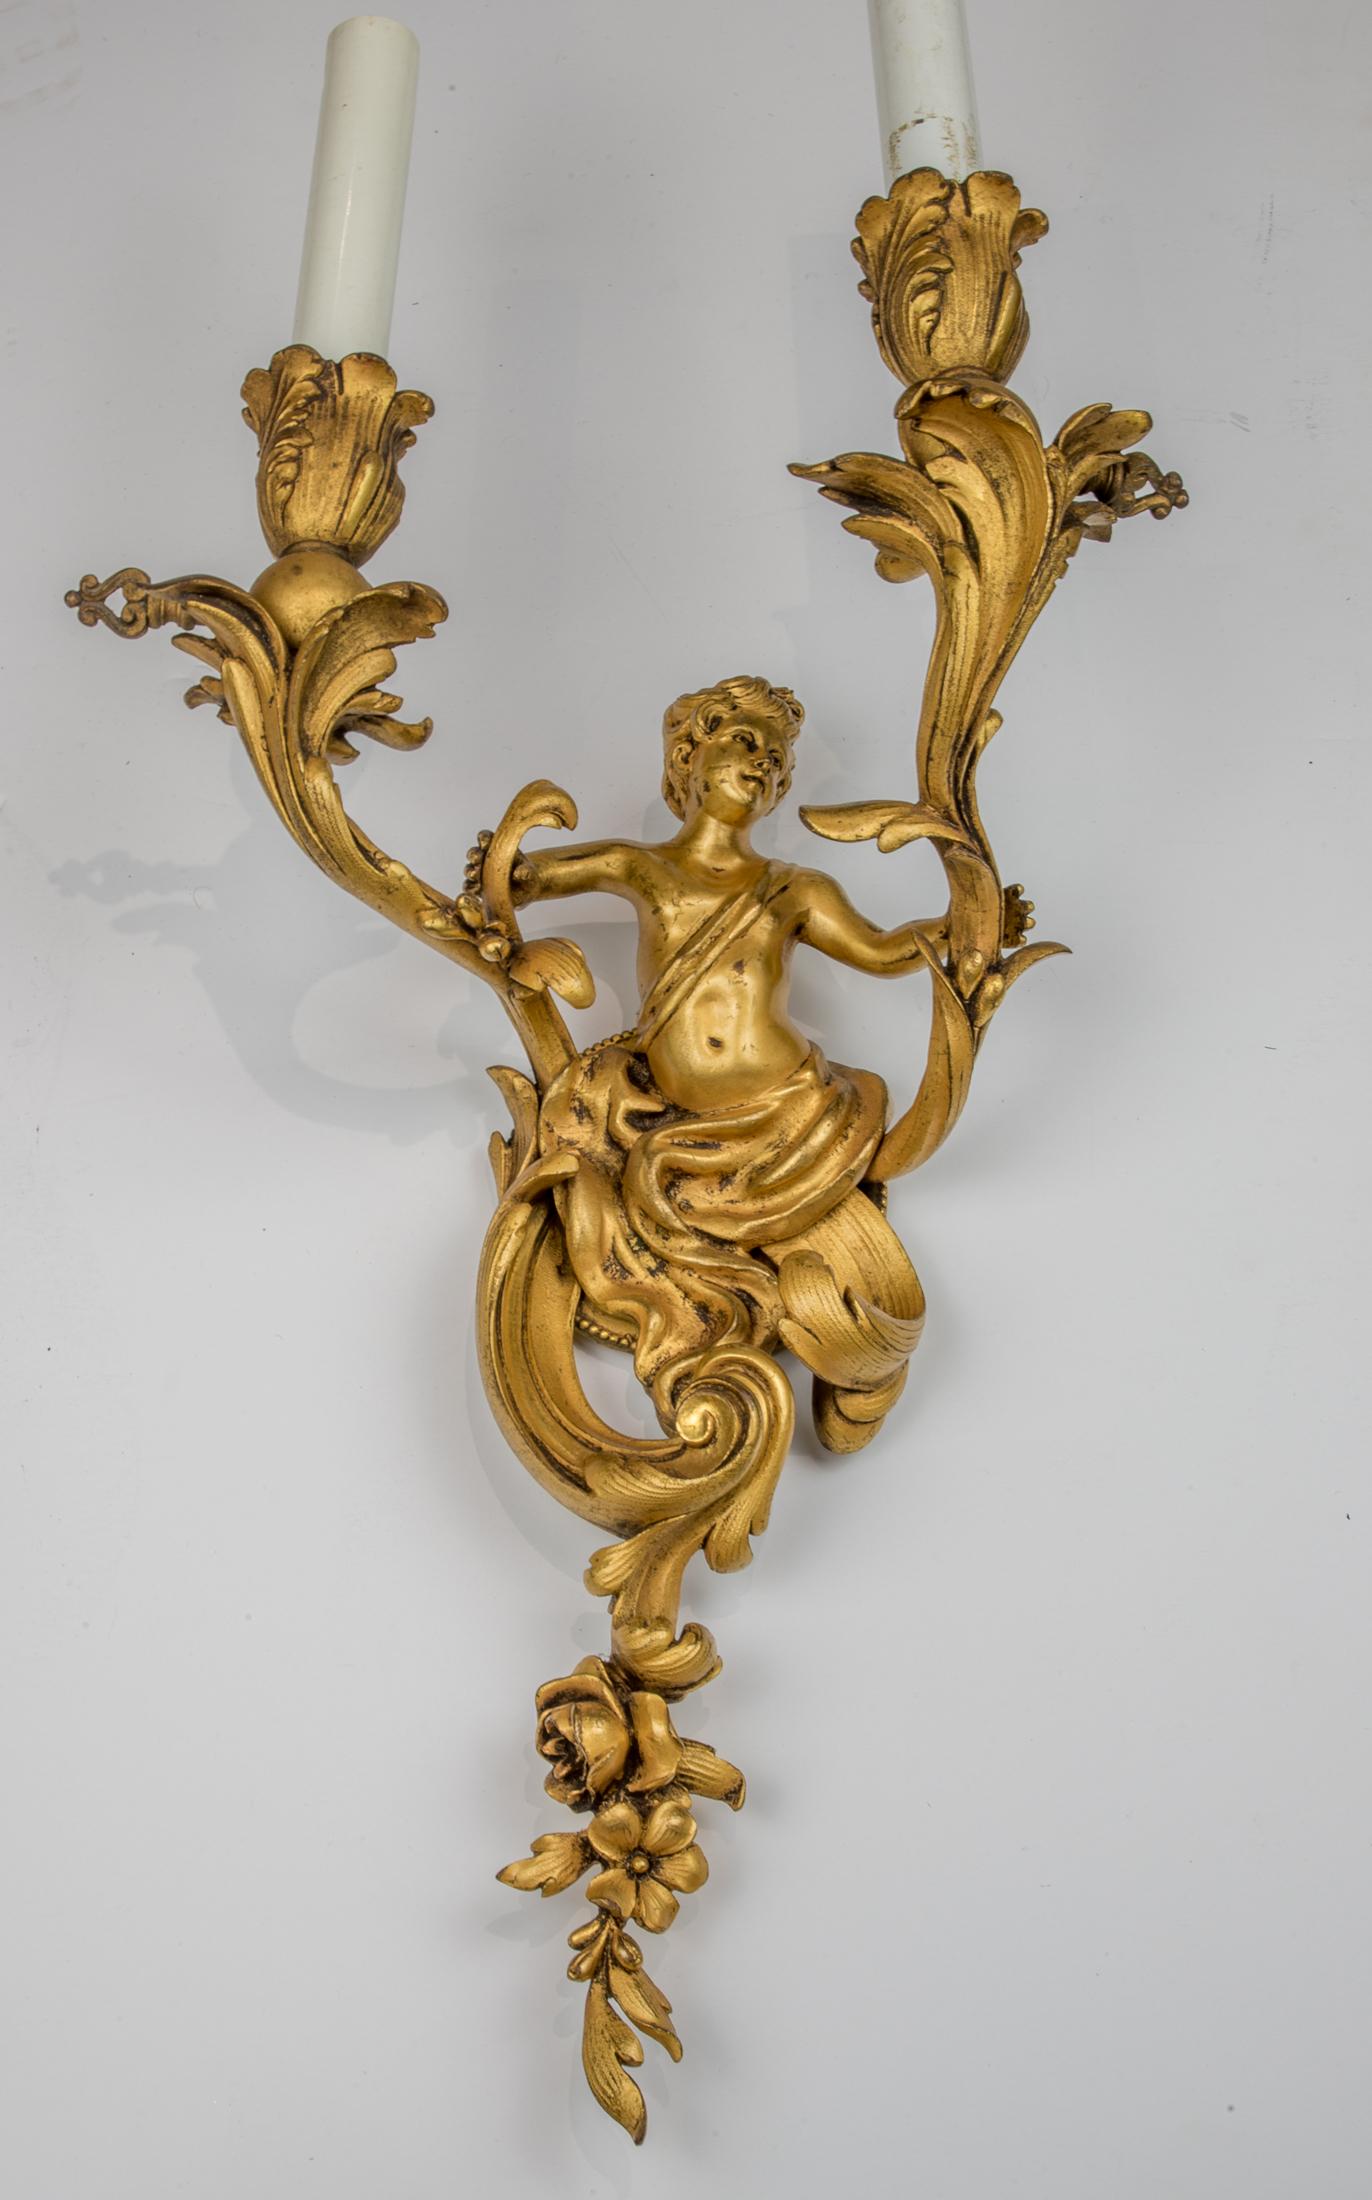 Each circular acanthus leaf decorated backplate issuing a male term holding onto scrolling acanthus leaves ending in bulb-form light sockets.
 
Origin: French
Date: Early 20th century
Dimension: Height 11 x 9 3/4 x 6 1/4 inches.